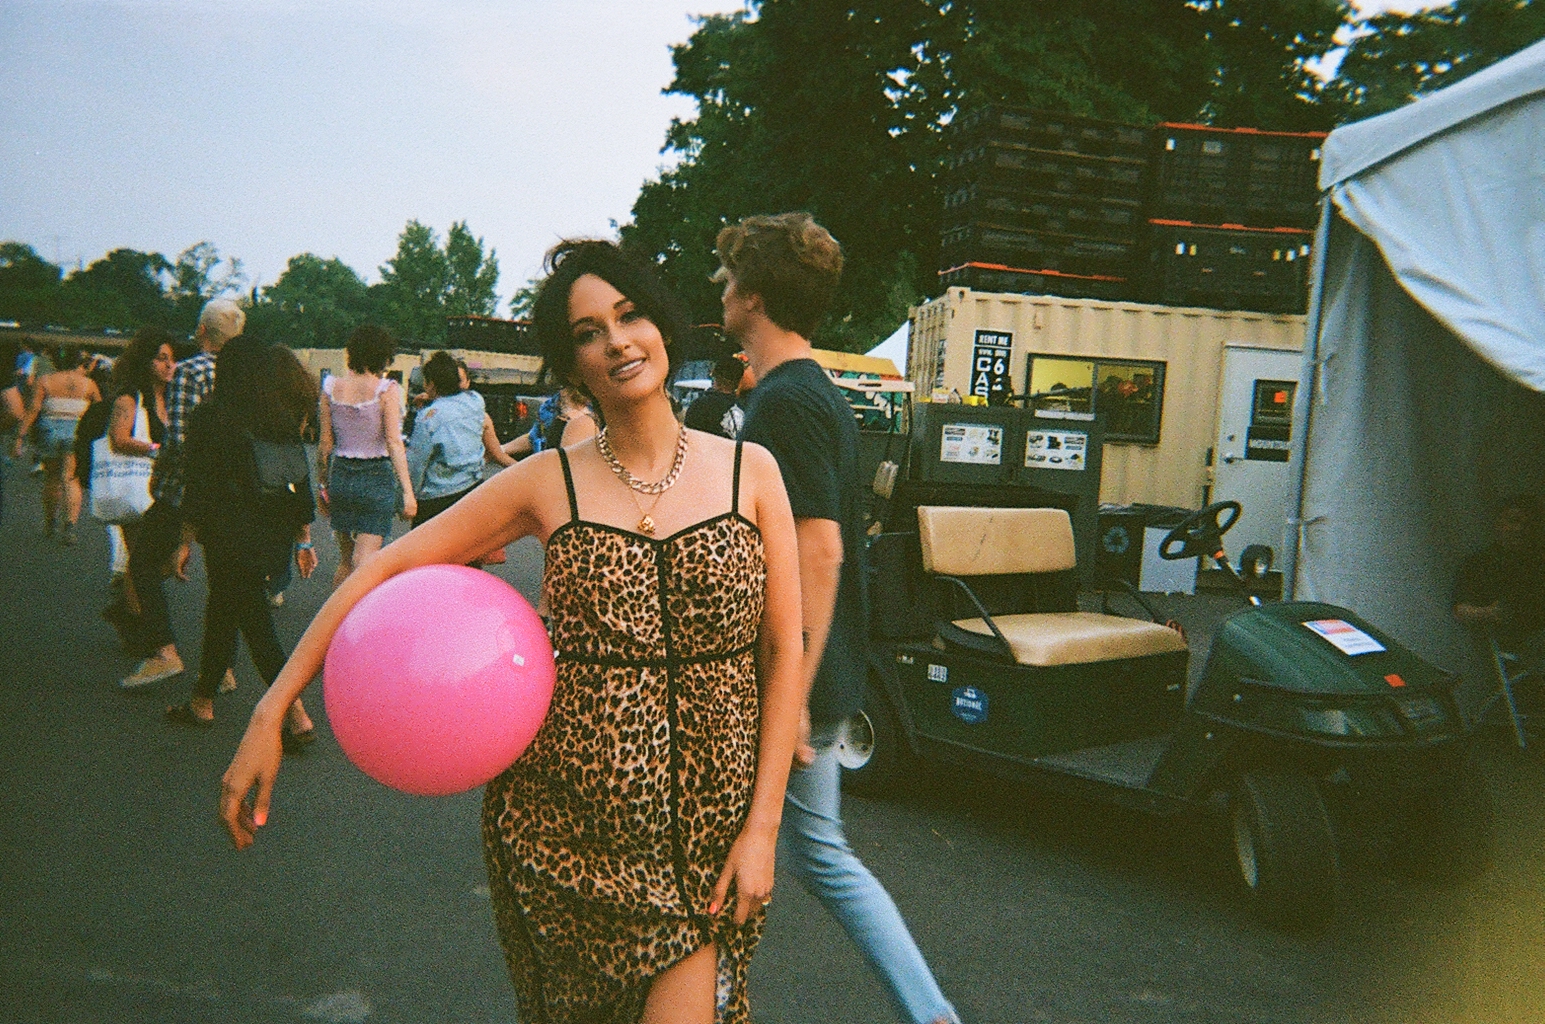  Country sweetheart Kasey Musgraves having a ball backstage before her set.